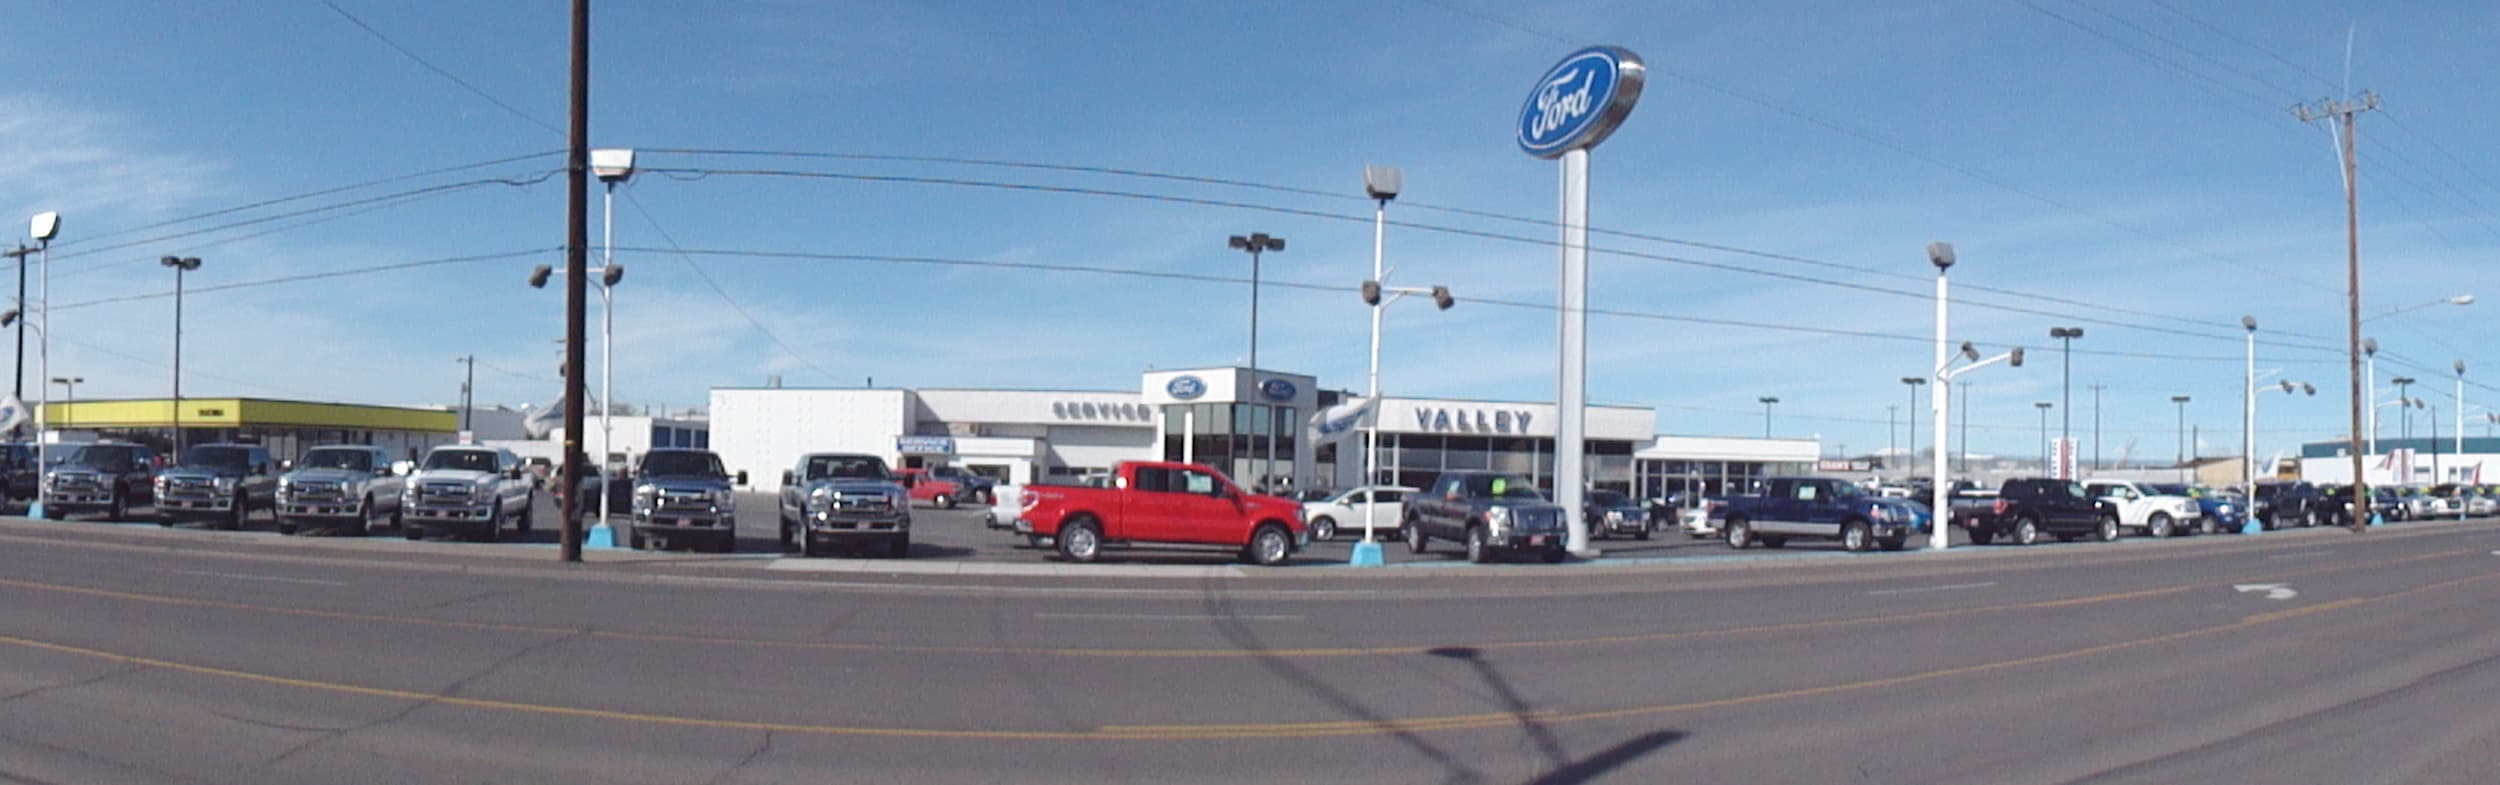 Valley ford nissan yakima